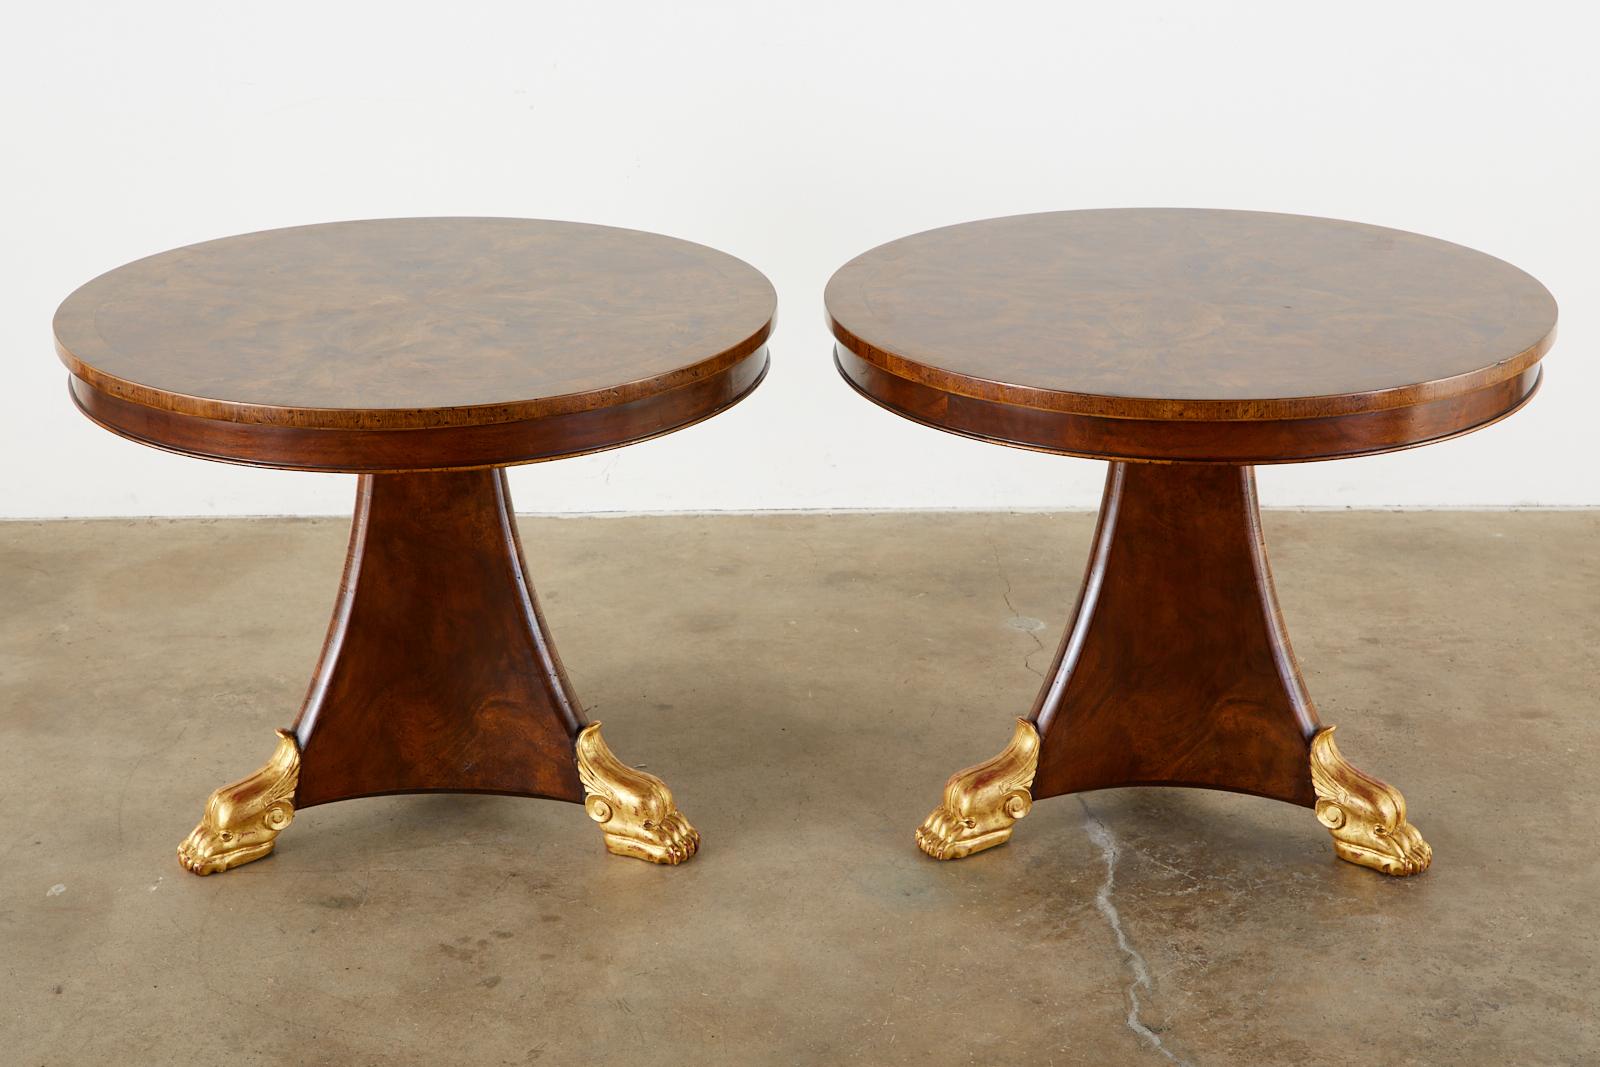 20th Century Pair of English Regency Style Burl Wood Library or Center Tables For Sale